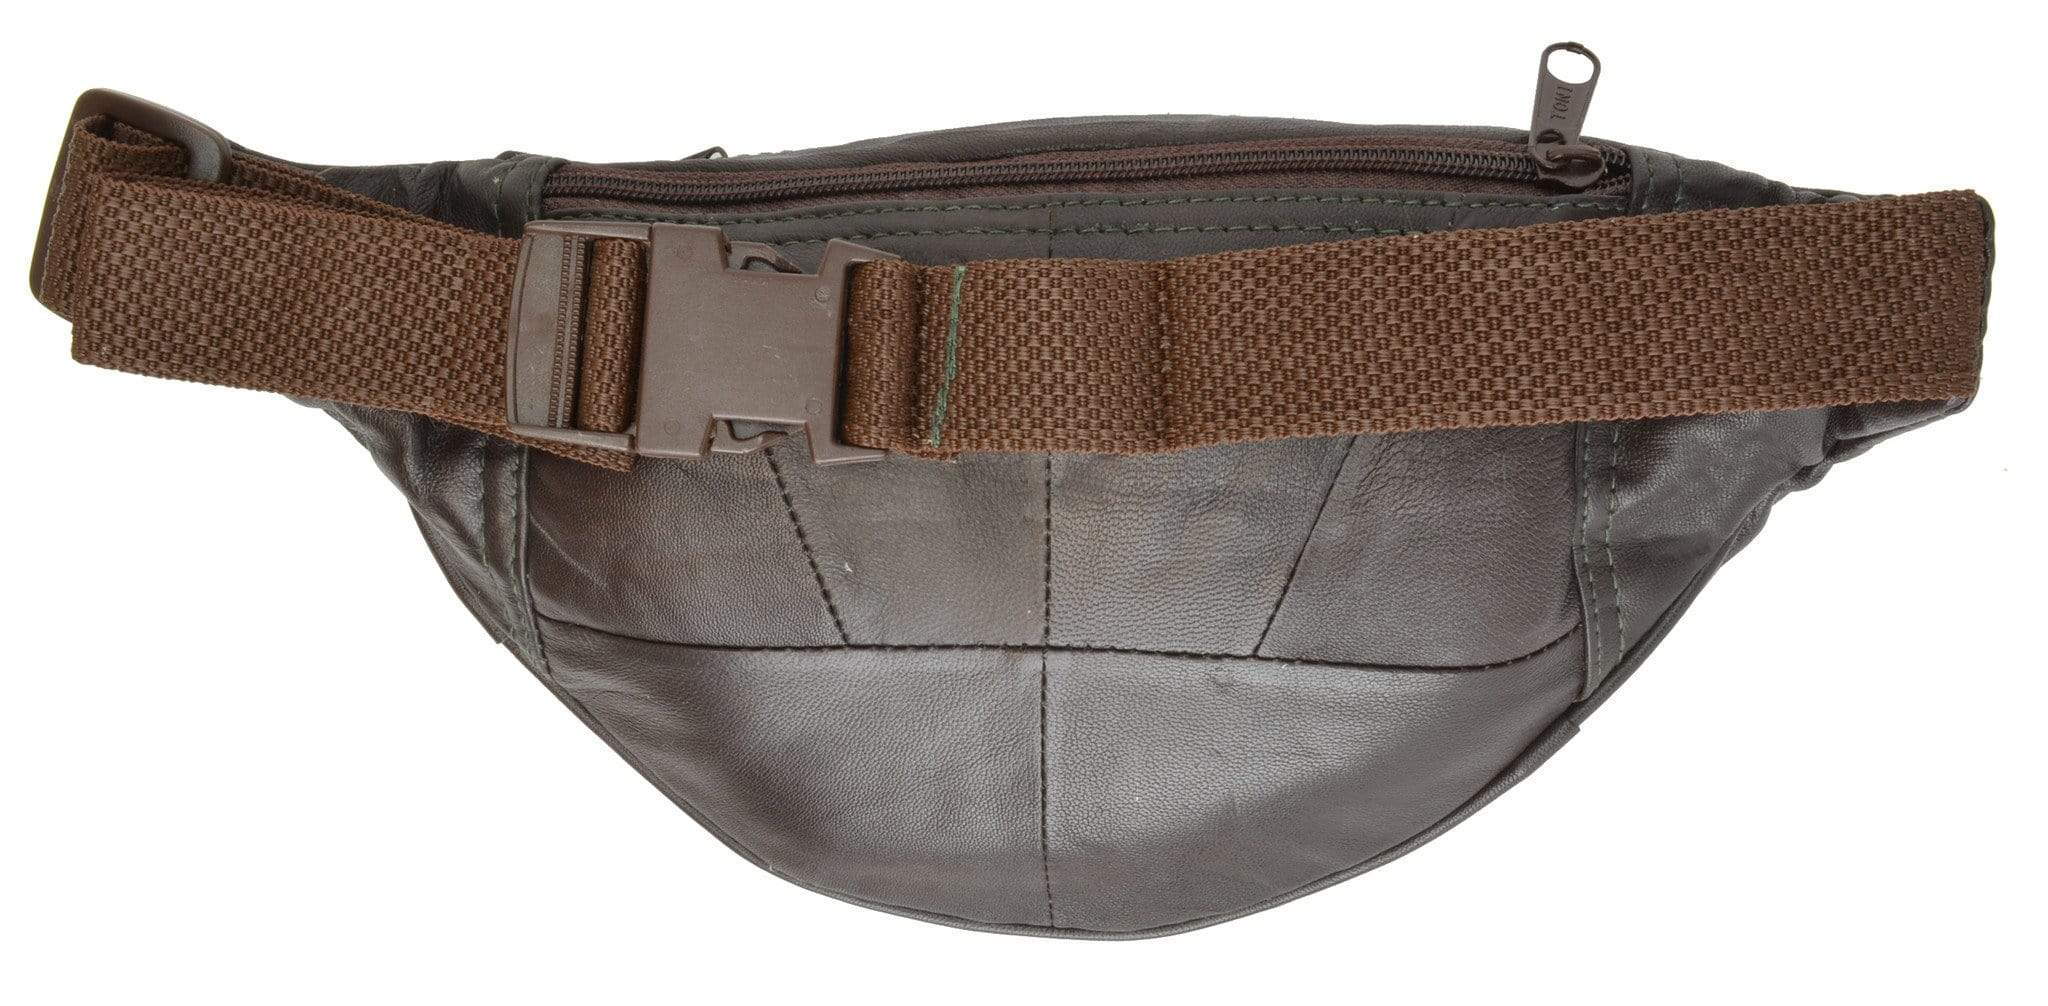 Leather Fanny Pack | Leather Fanny Packs, Waist Bags & Belt Bags - image 2 of 7